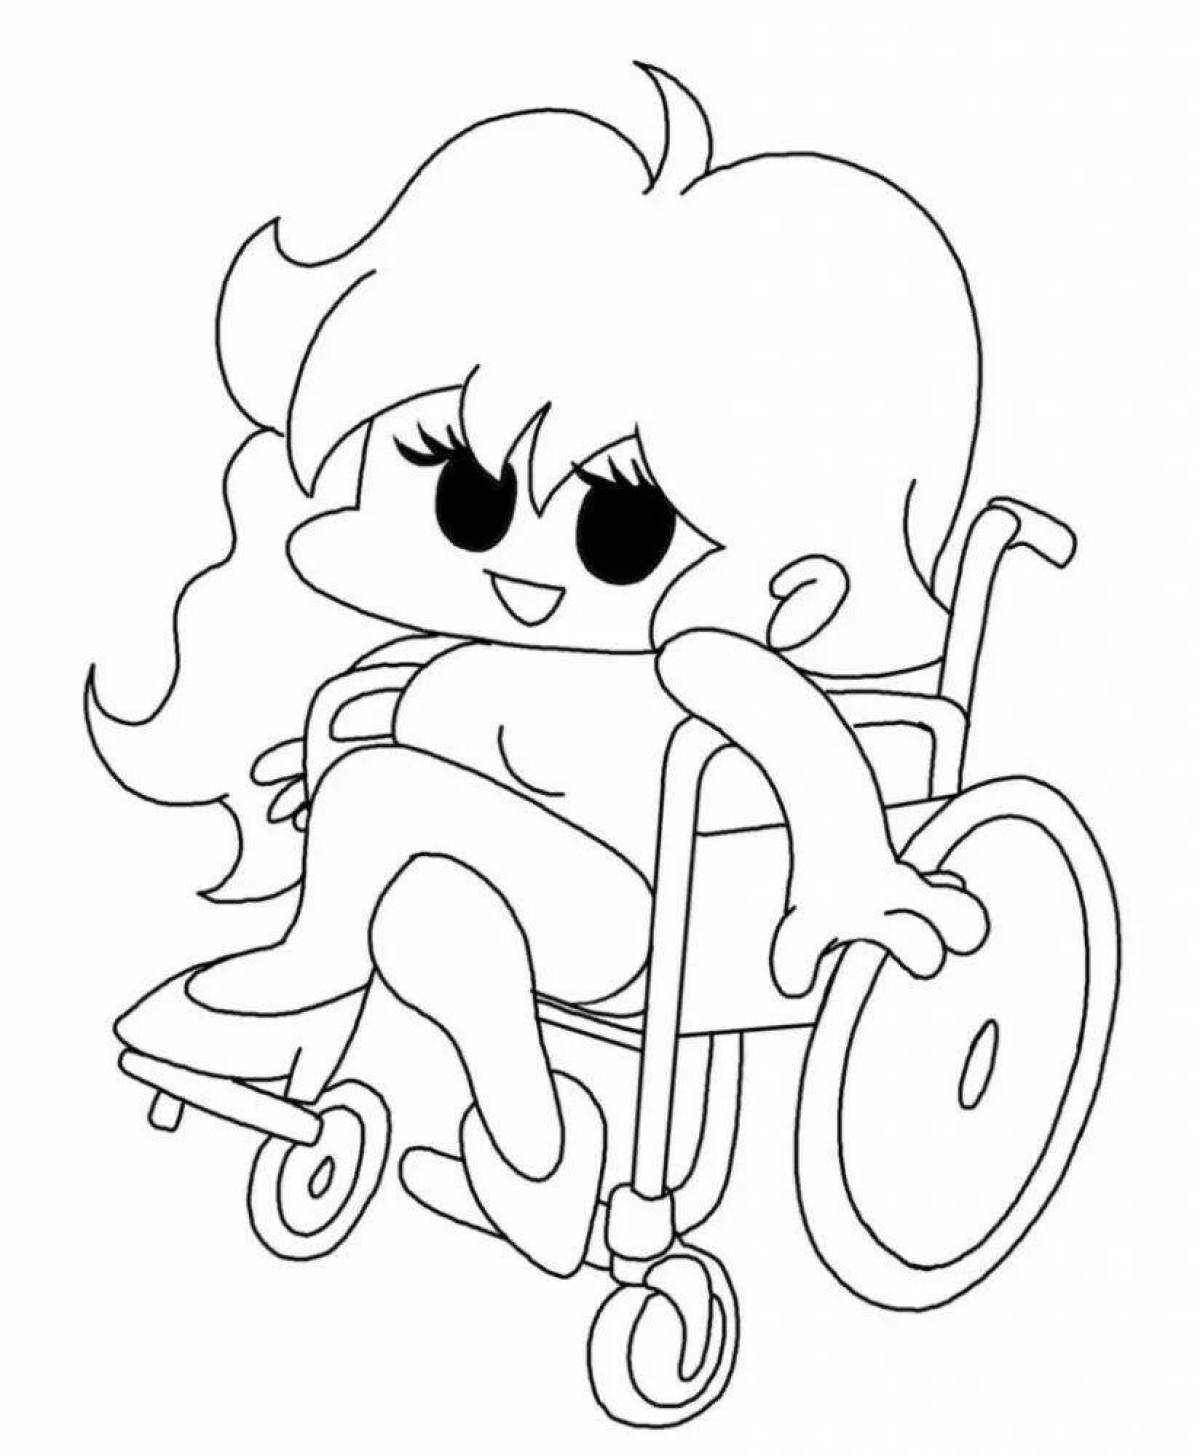 Flippy fat coloring page